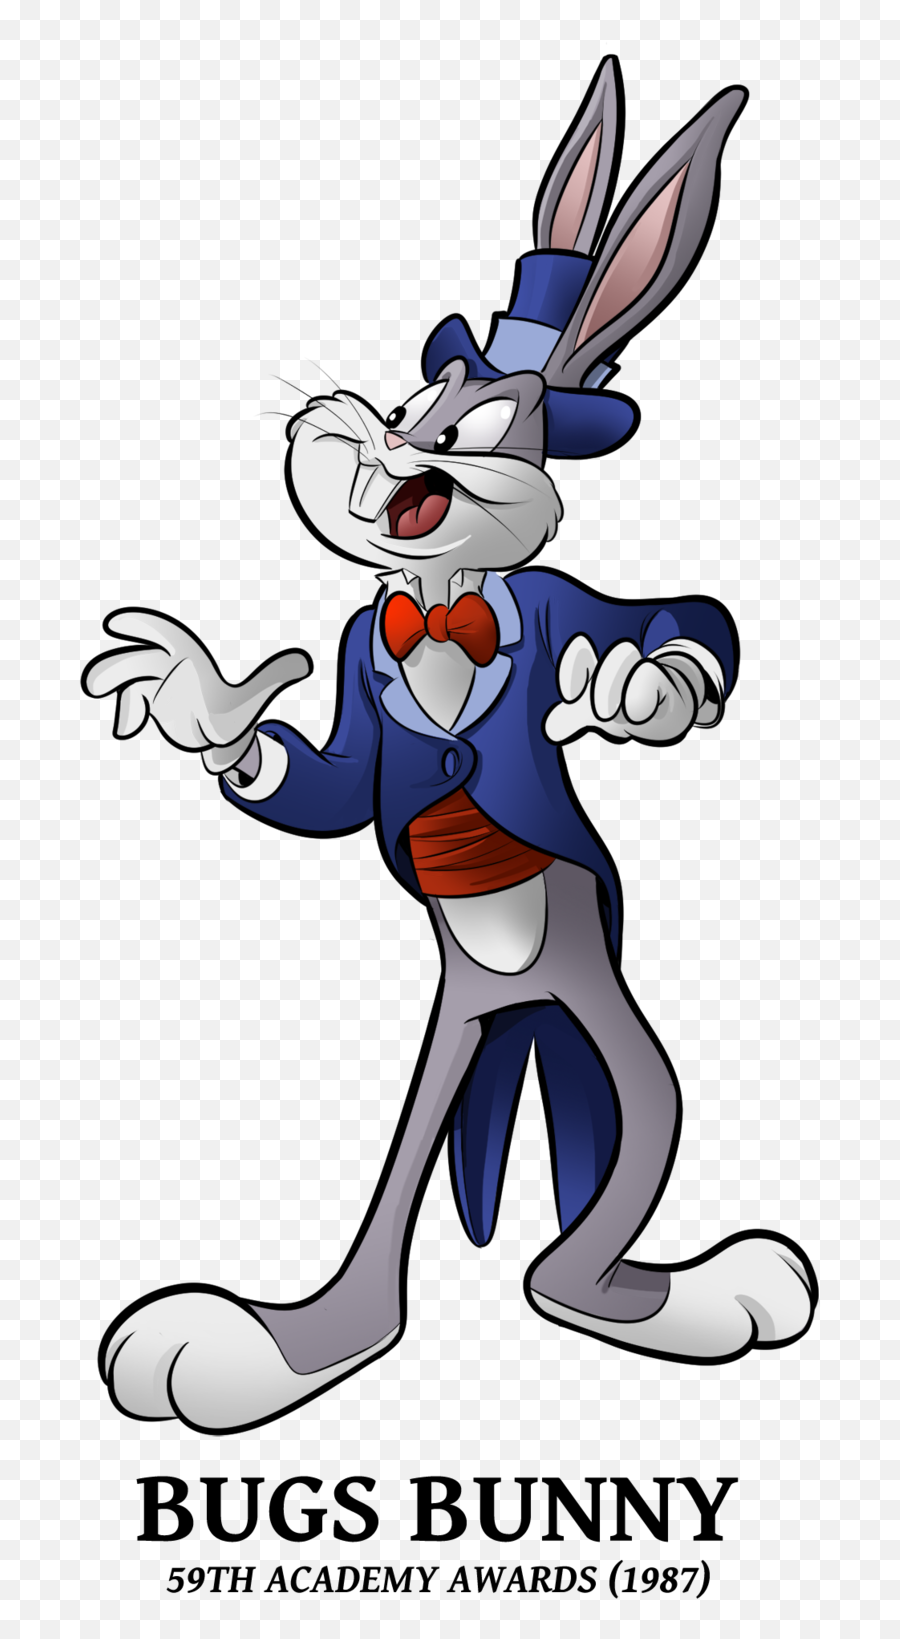 Bugs Bunny Png - Bugs Bunny By Boscoloandrea,Bugs Bunny Png